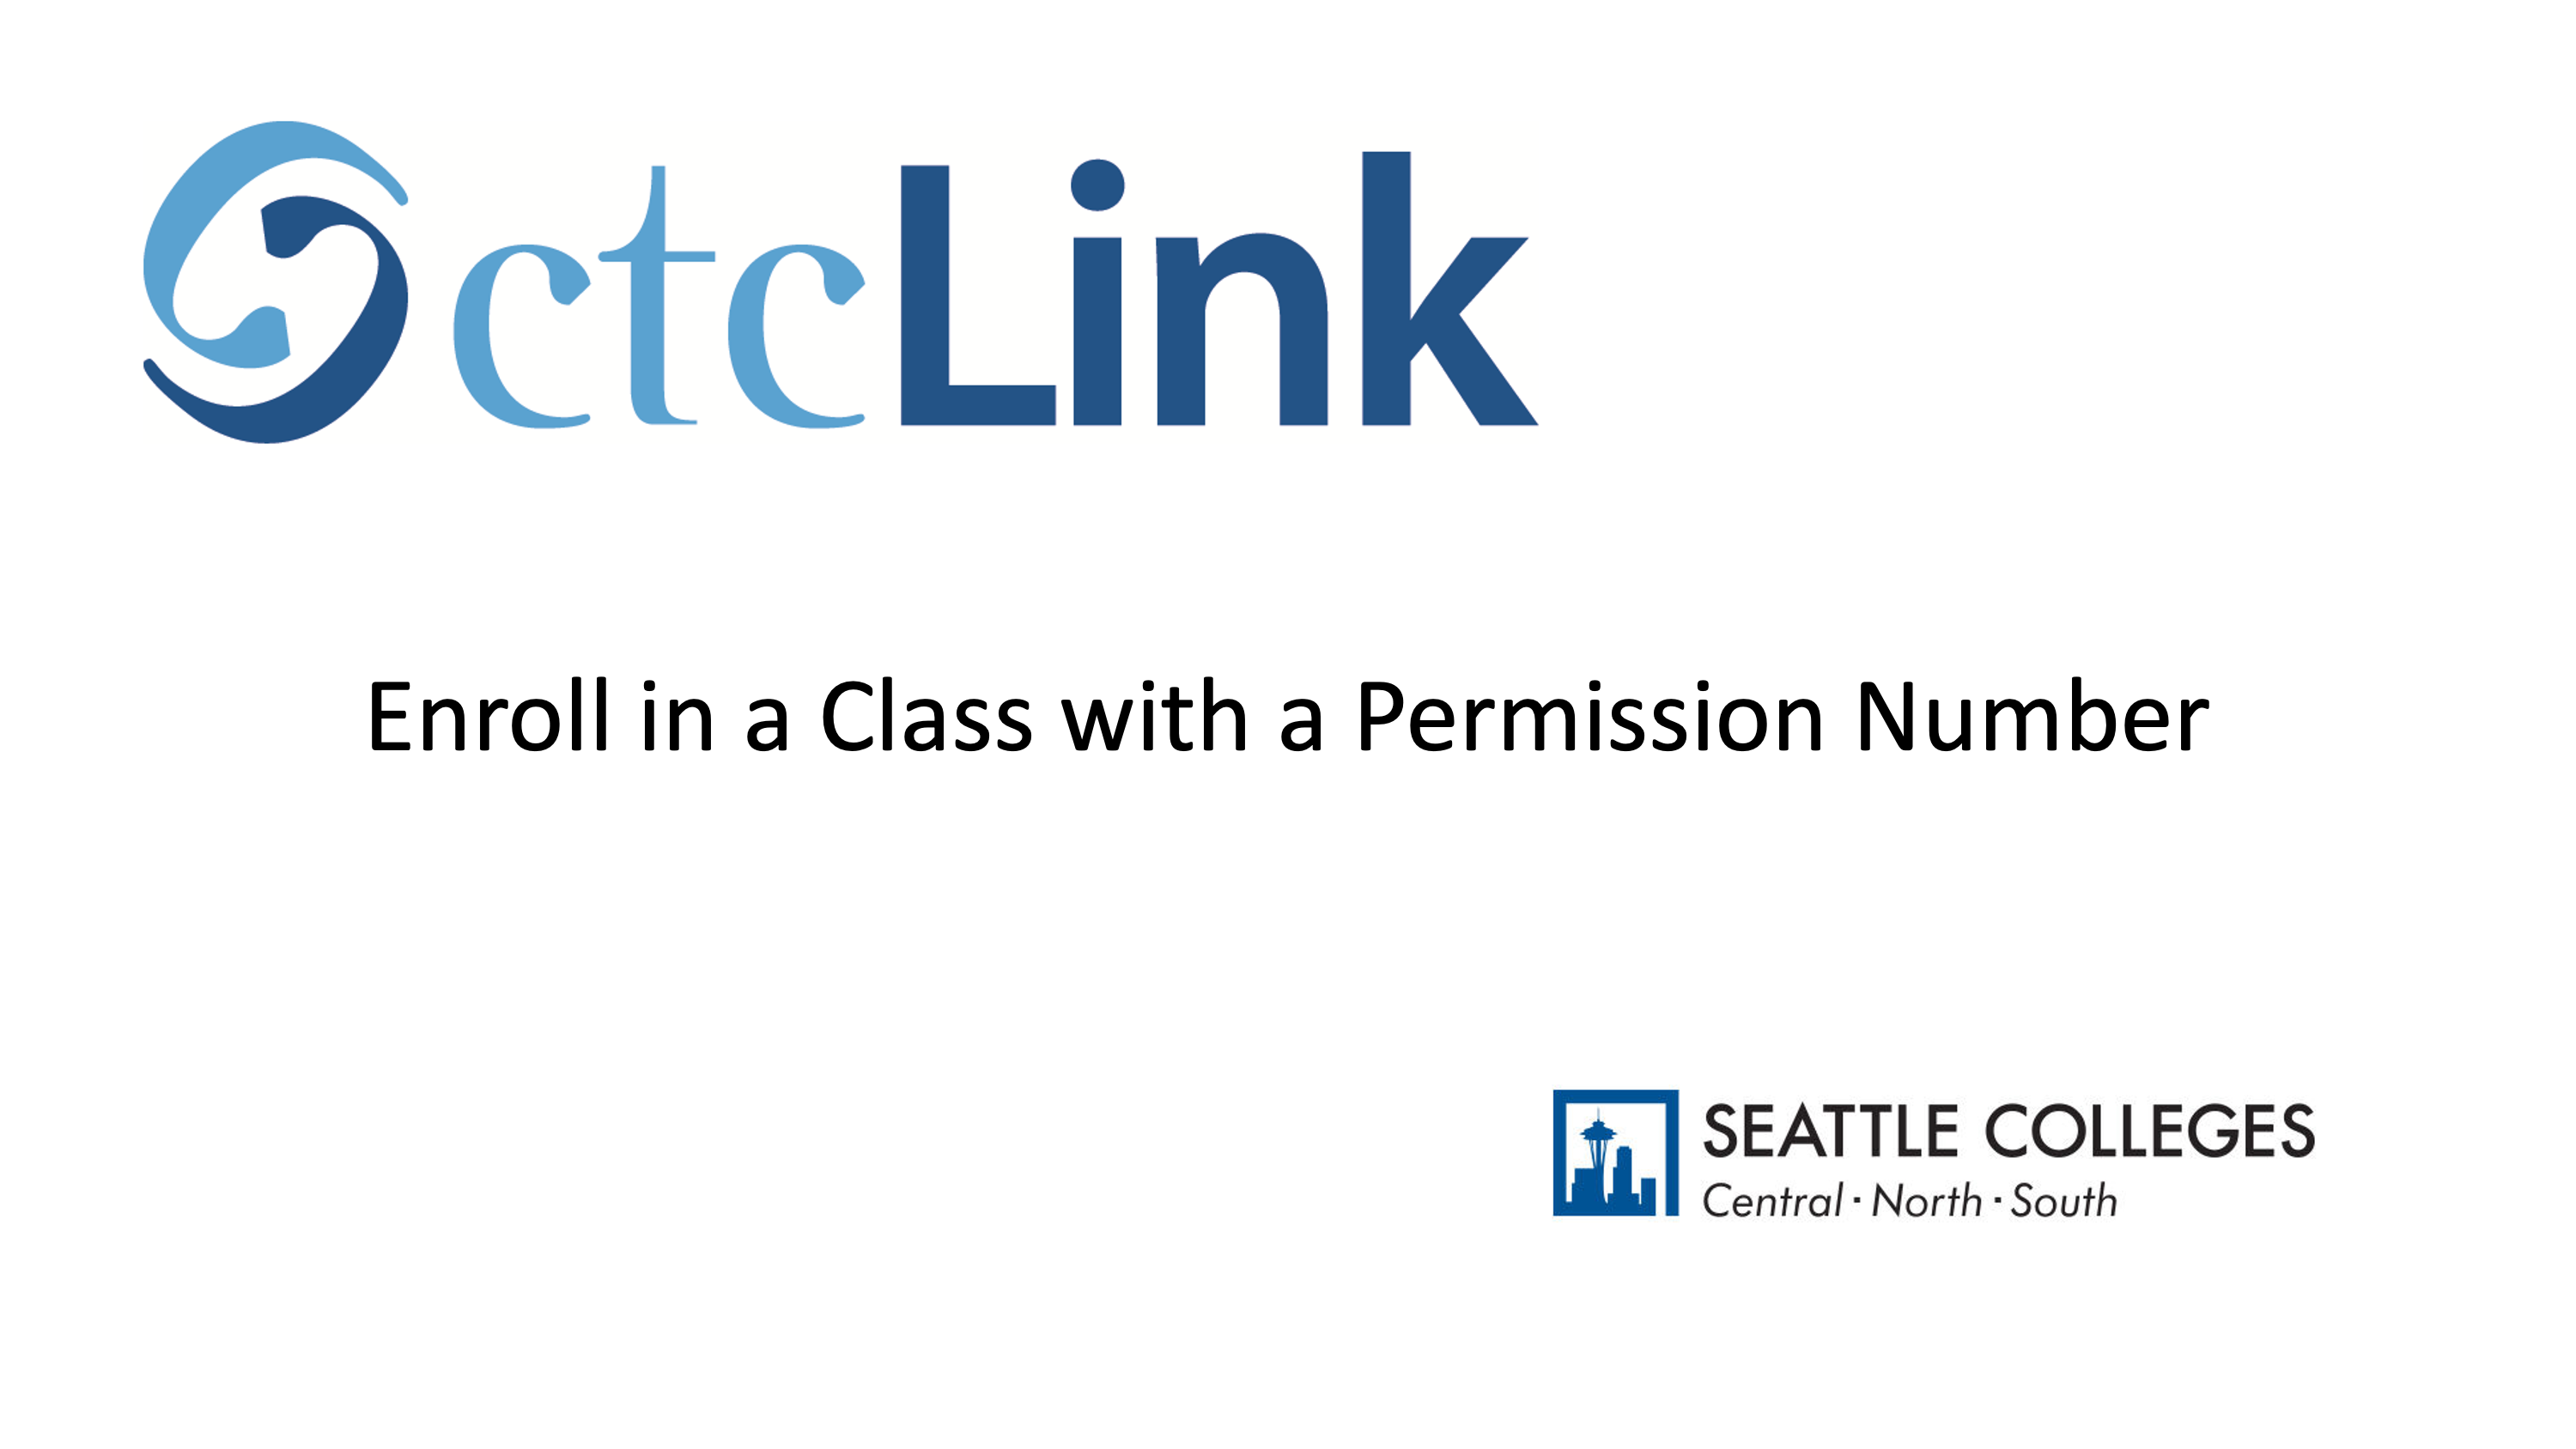 Enroll in a Class with a Permission Number